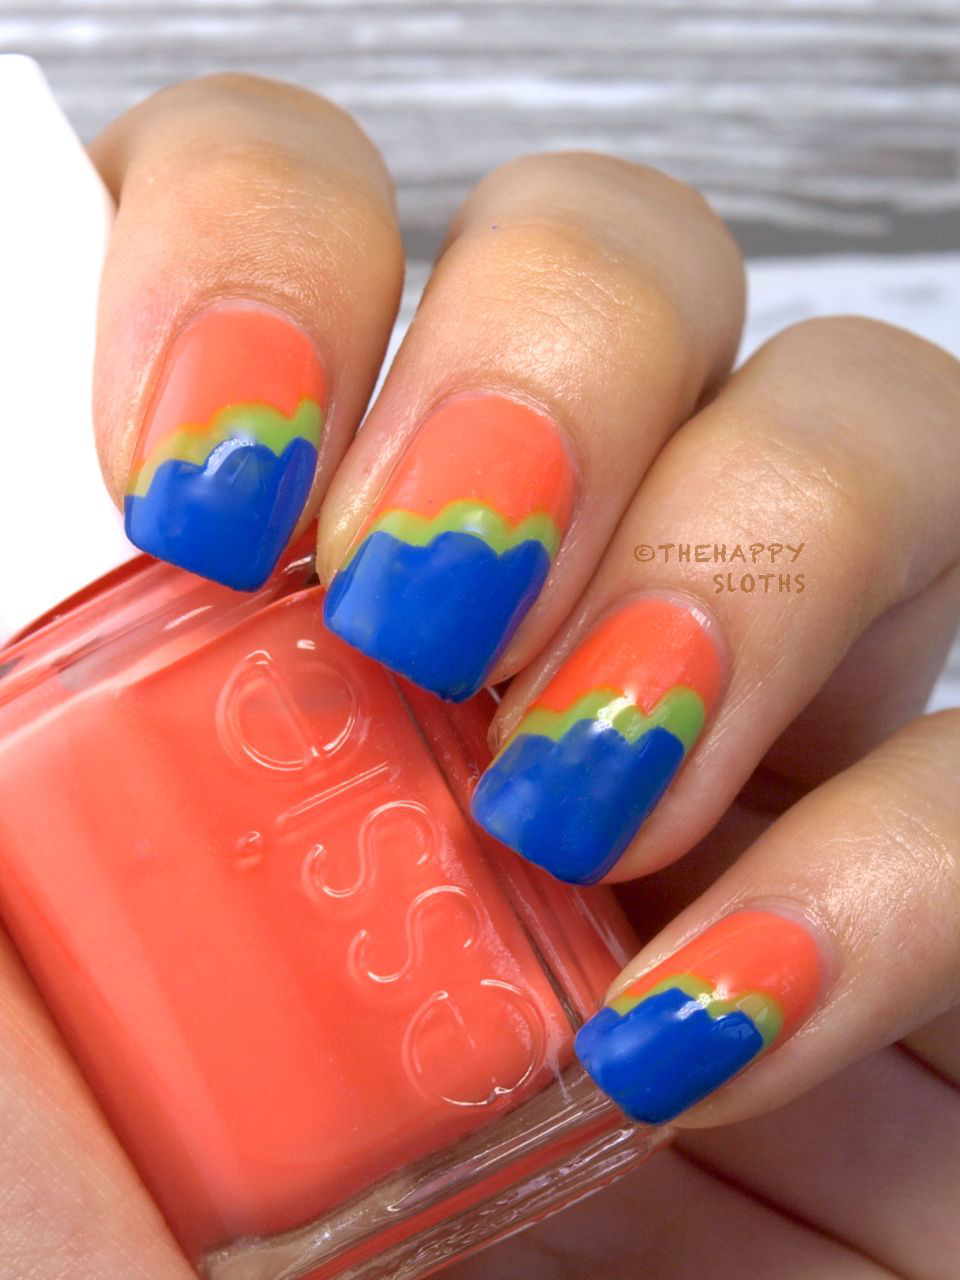 Scalloped Nail Art Tutorial featuring Essie 2014 Neon Collection